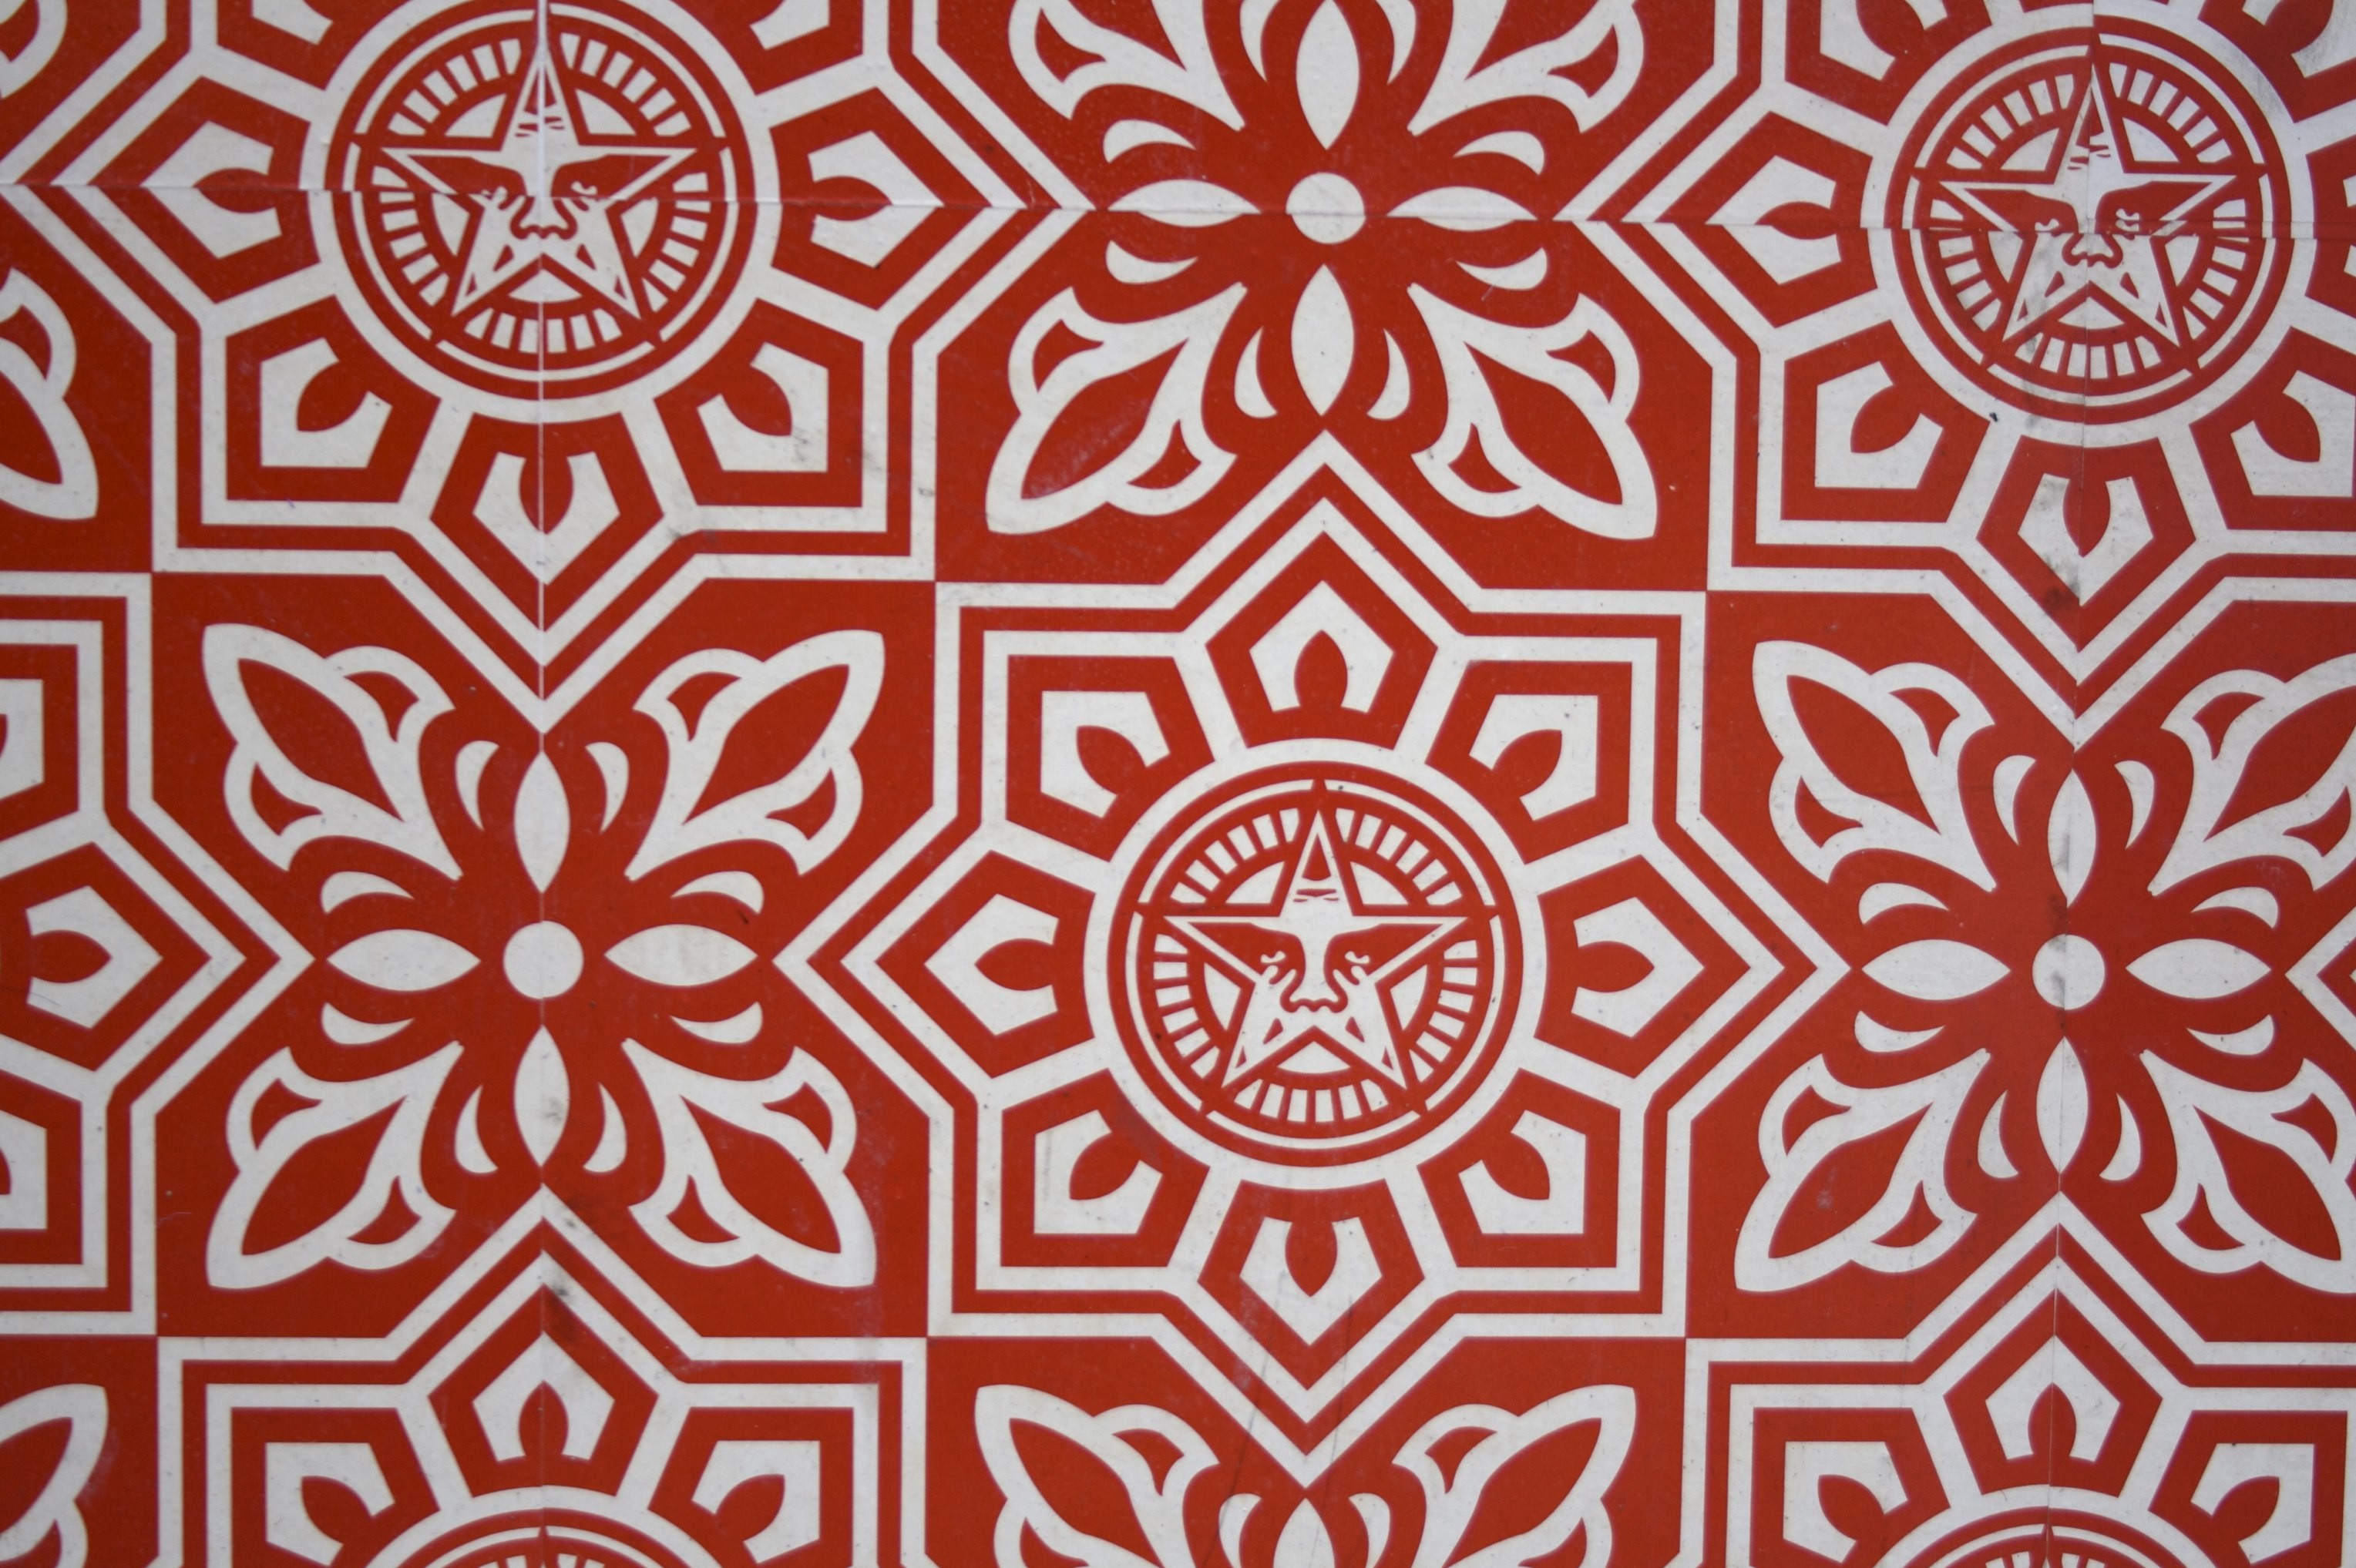 3057x2035 Obey Wallpapers For Iphone Obey Wallpaper Related